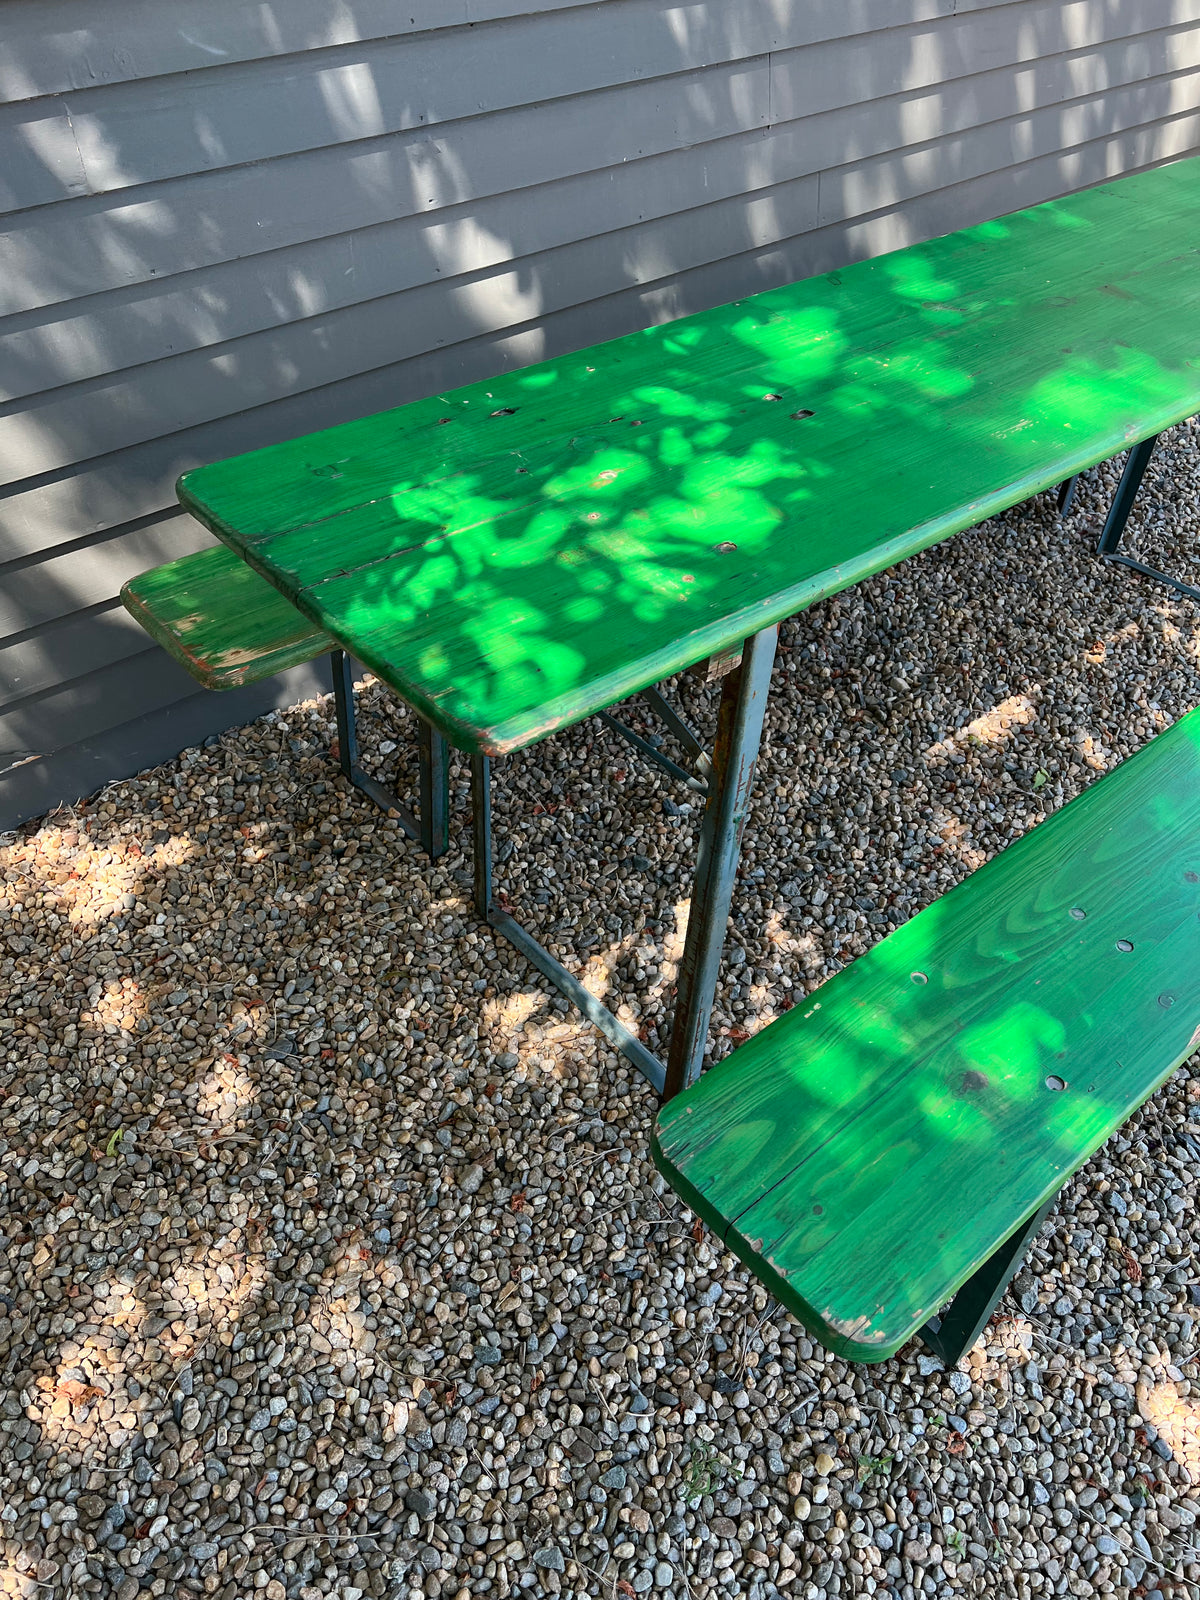 Vintage Beer Garden Table + Benches